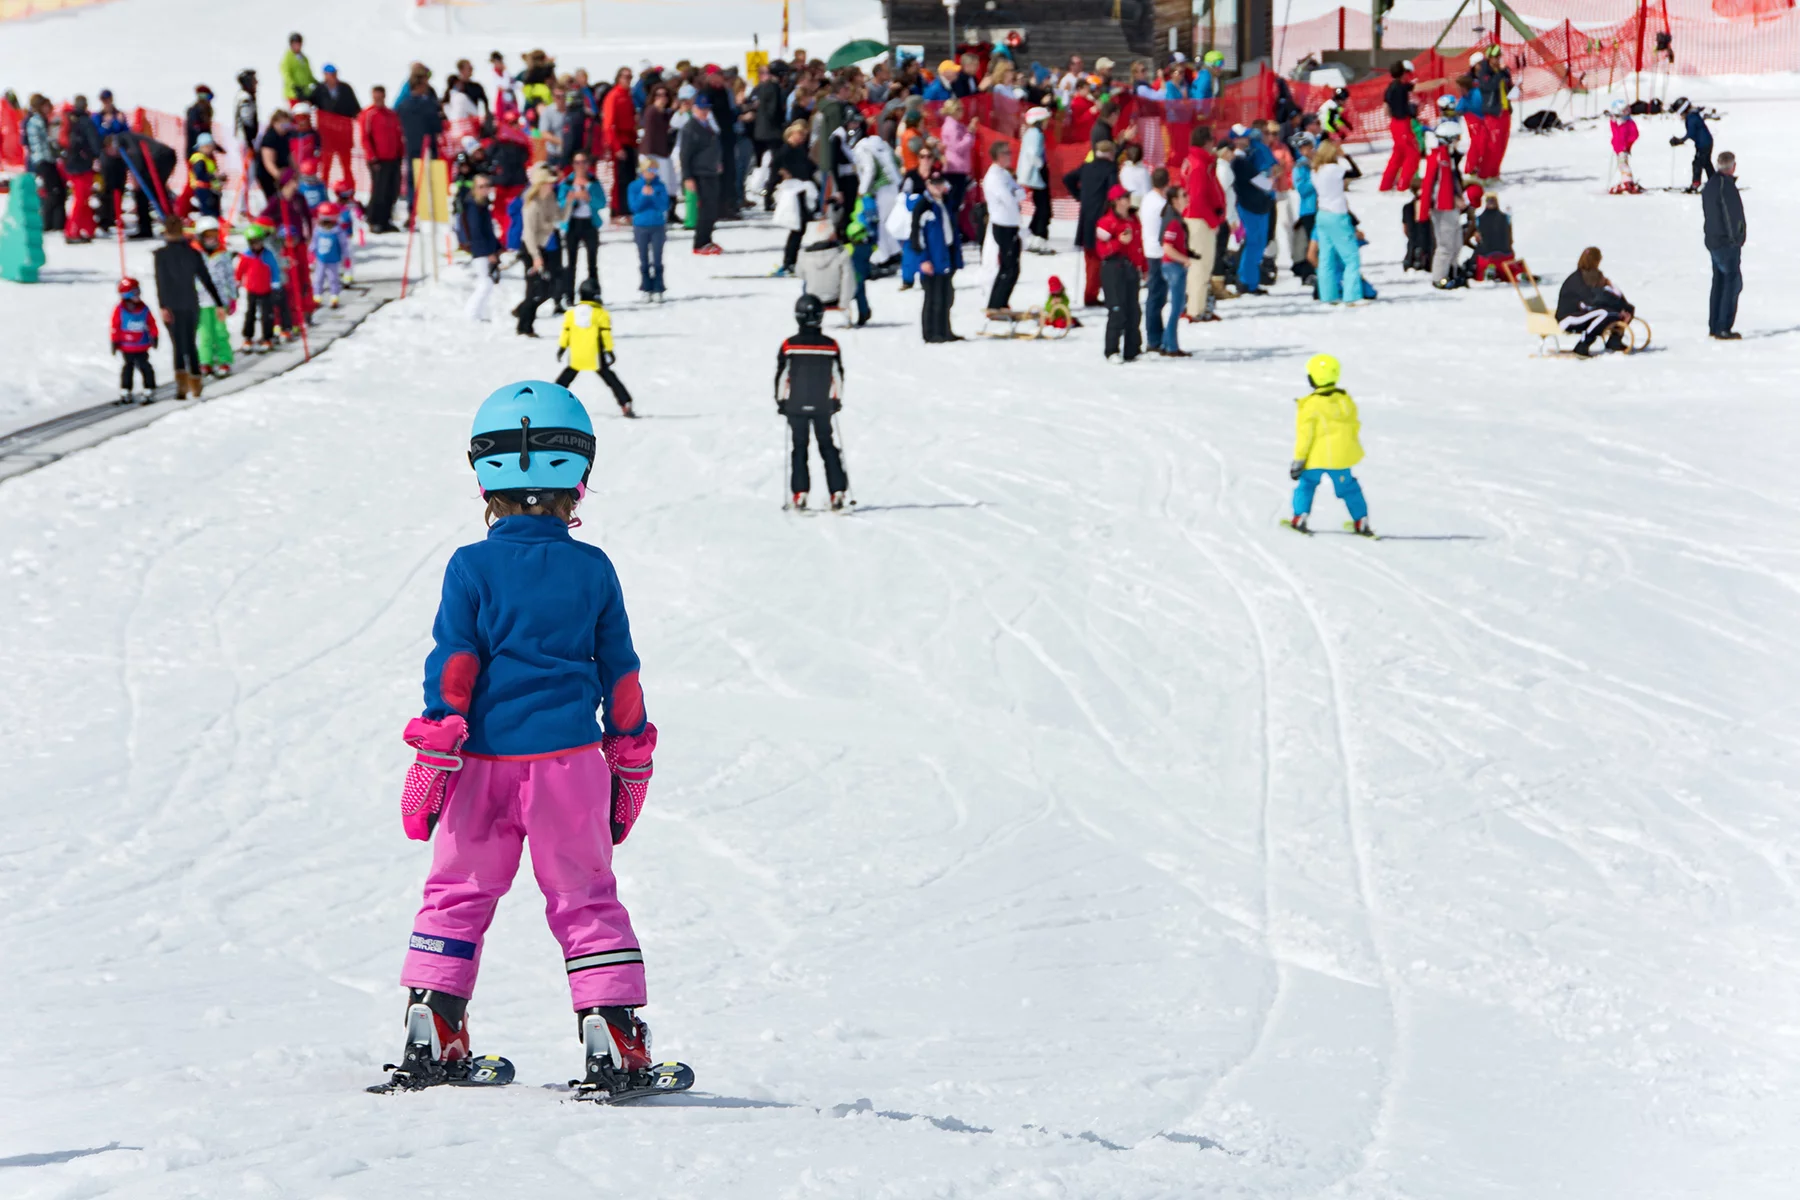 Children skiing while on holiday in Austria